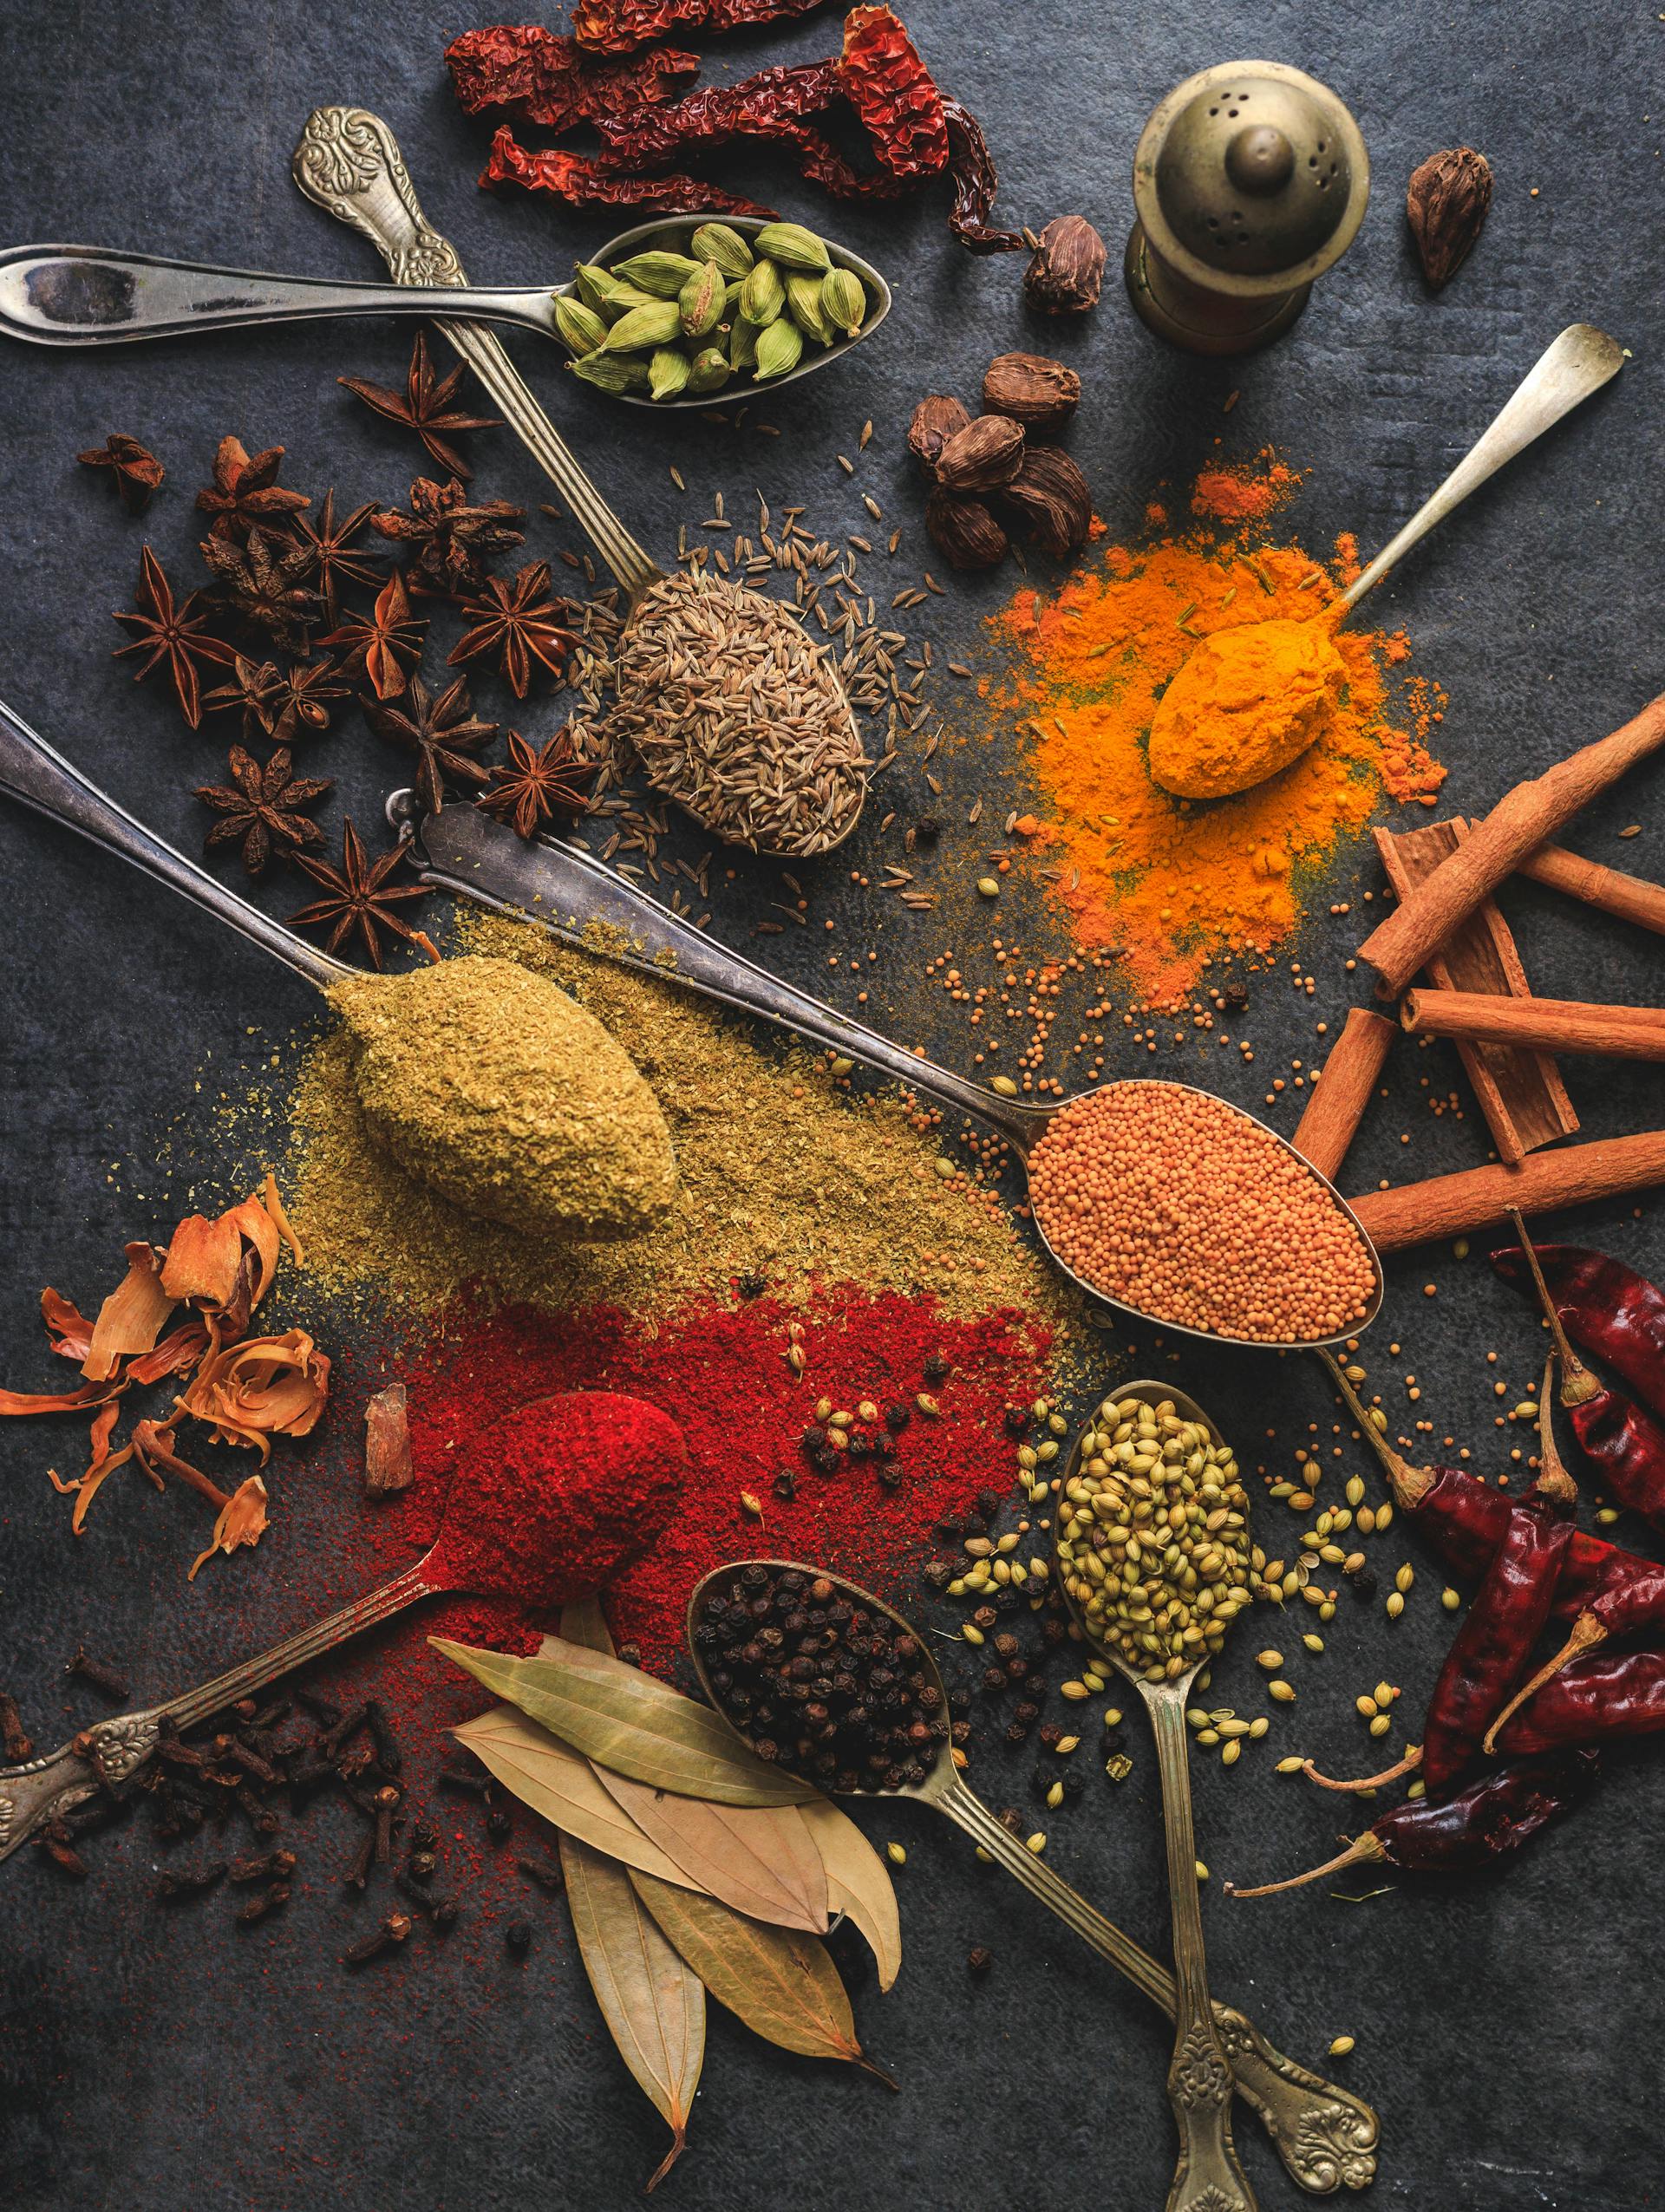 Assorted cooking spices | Source: Pexels